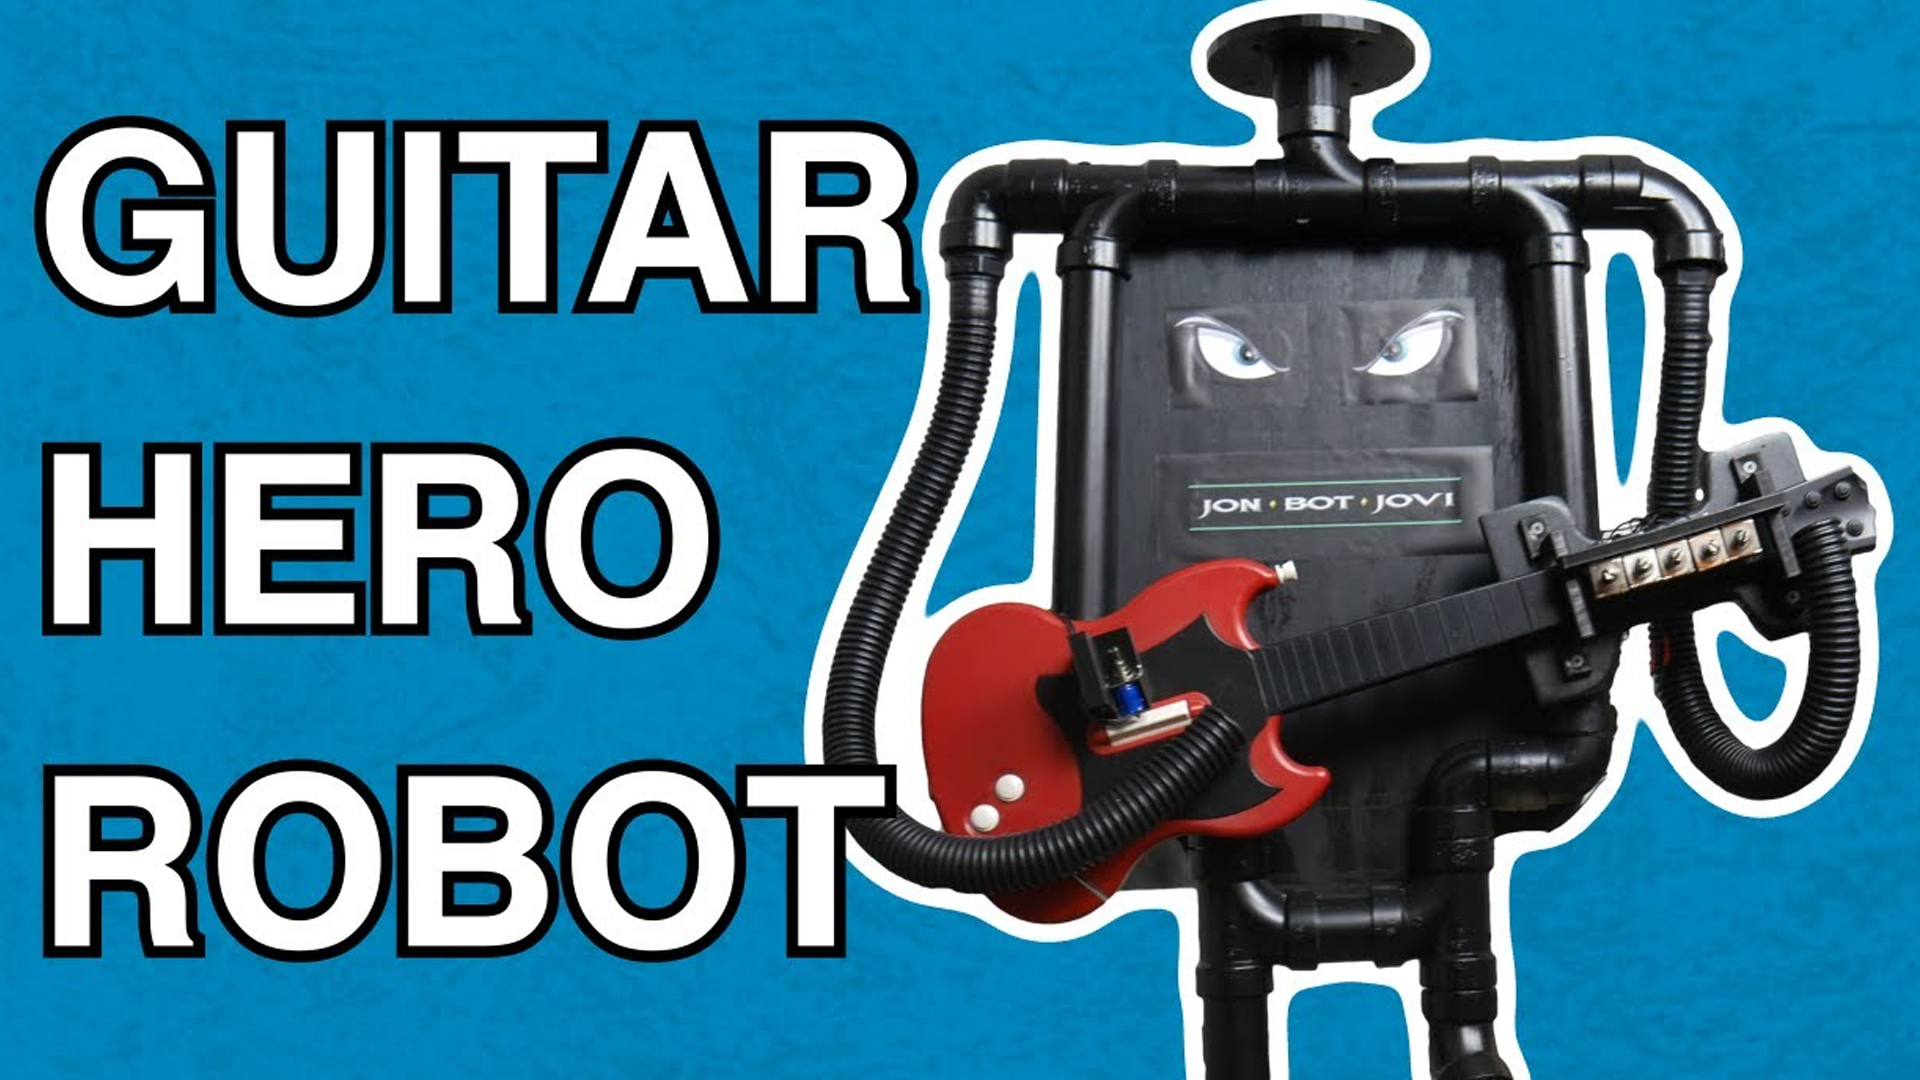 This Raspberry Pi Robotic Can Shred By Any Song on ‘Guitar Hero’